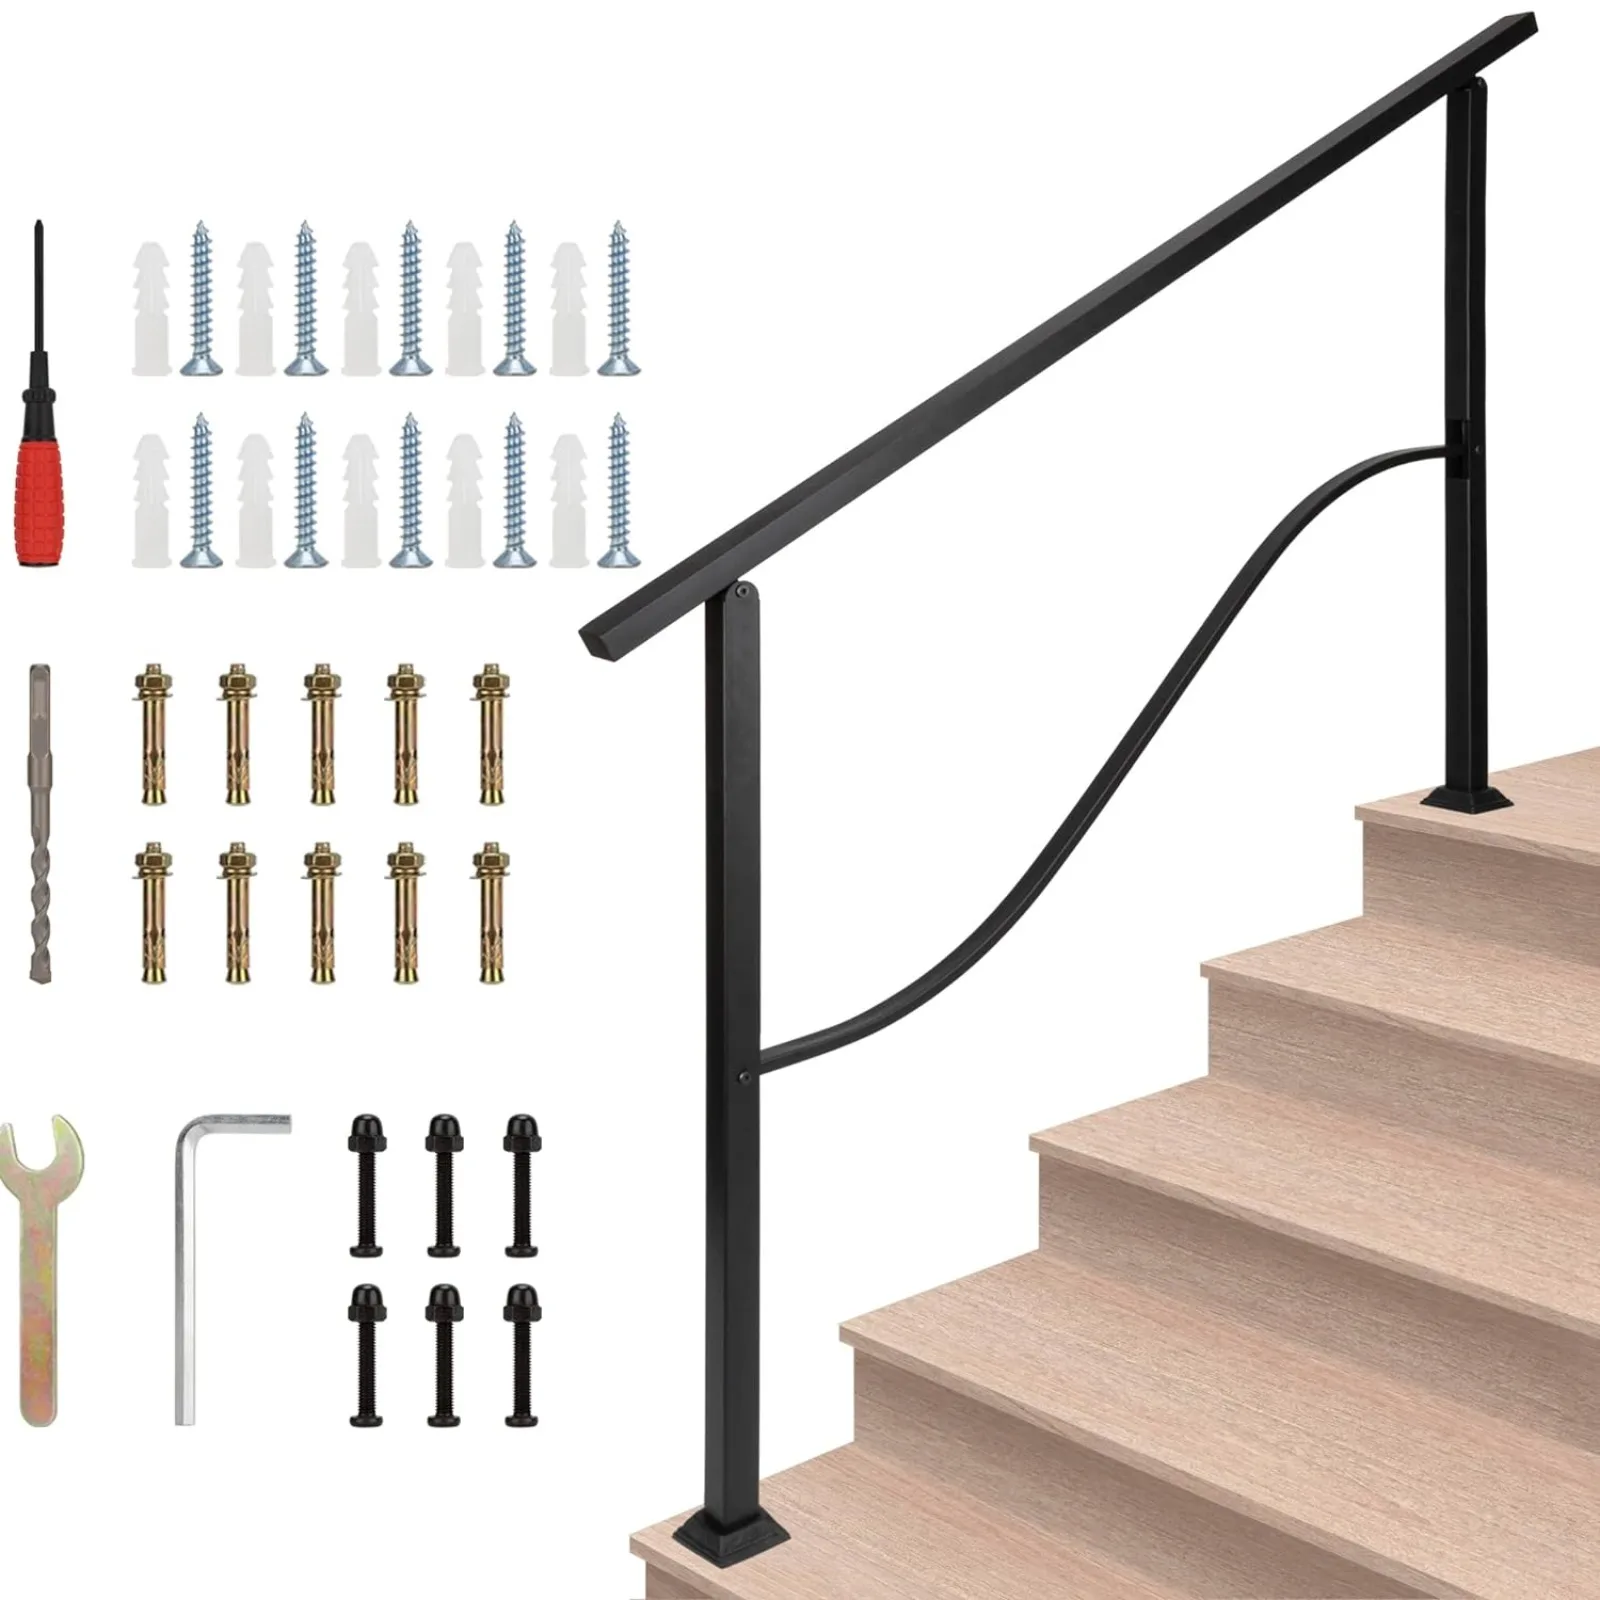 

US Adjtable Black Wrought Iron Handrail for Outdoor Steps, Stair Railing Fits 4 to 5 Step